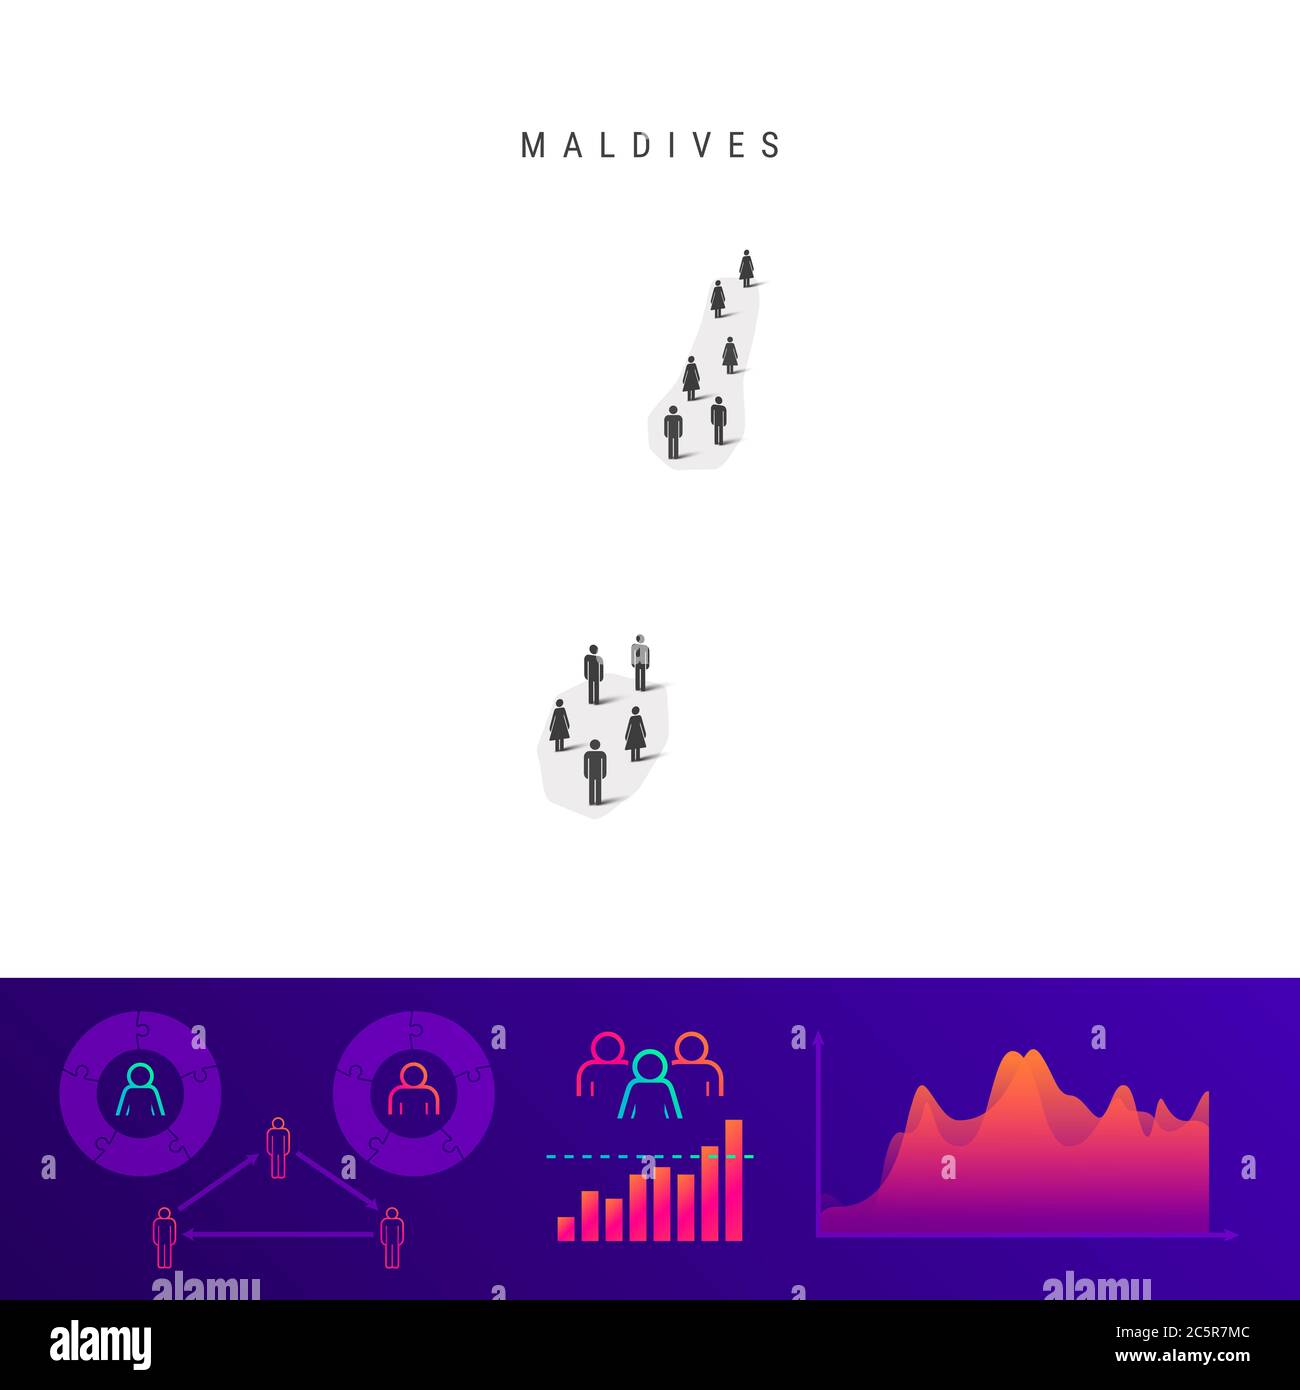 Maldivian people map. Detailed silhouette. Mixed crowd of men and women icons. Population infographic elements. illustration isolated on white. Stock Photo